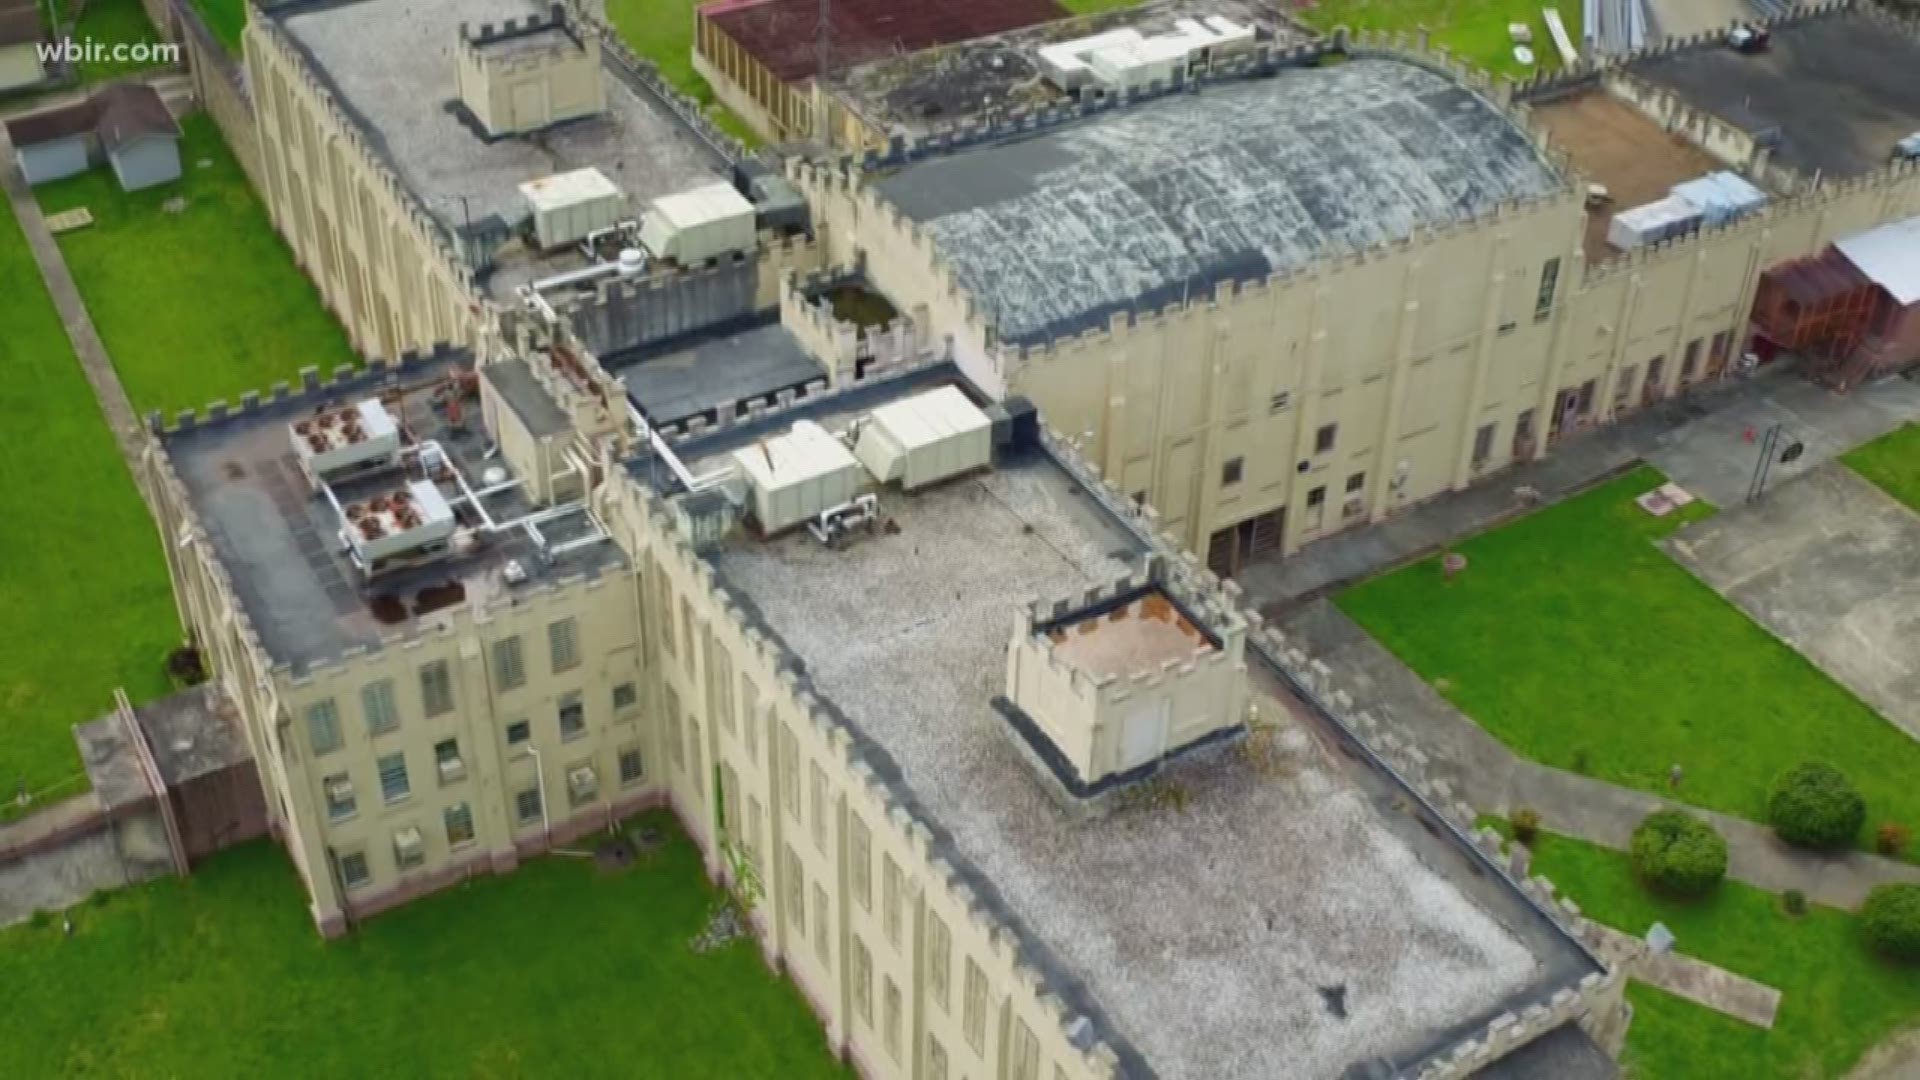 Brushy Mountain State Penitentiary will host concert series